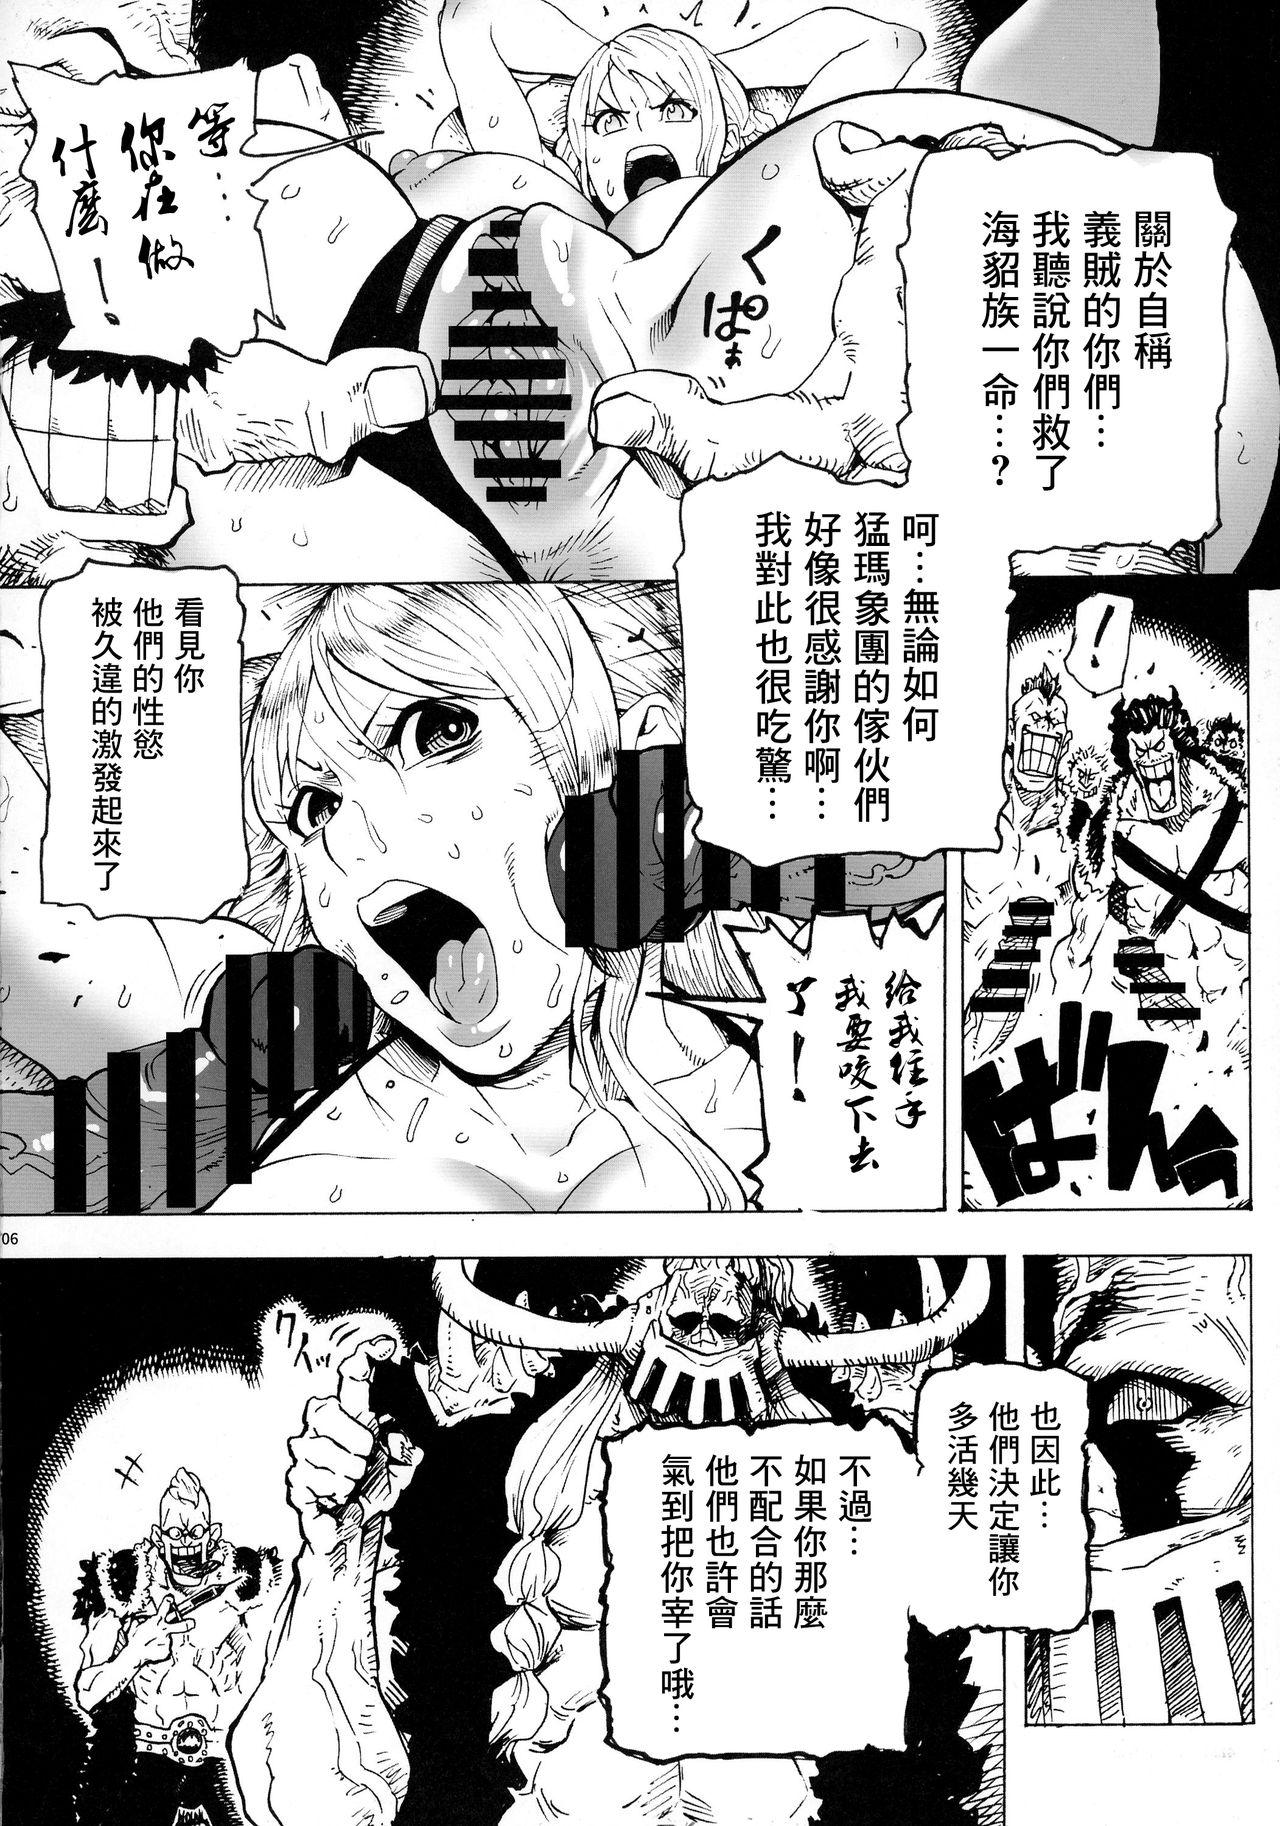 Style P.O.M Another Episode "J.A.C.K" - One piece Glam - Page 9